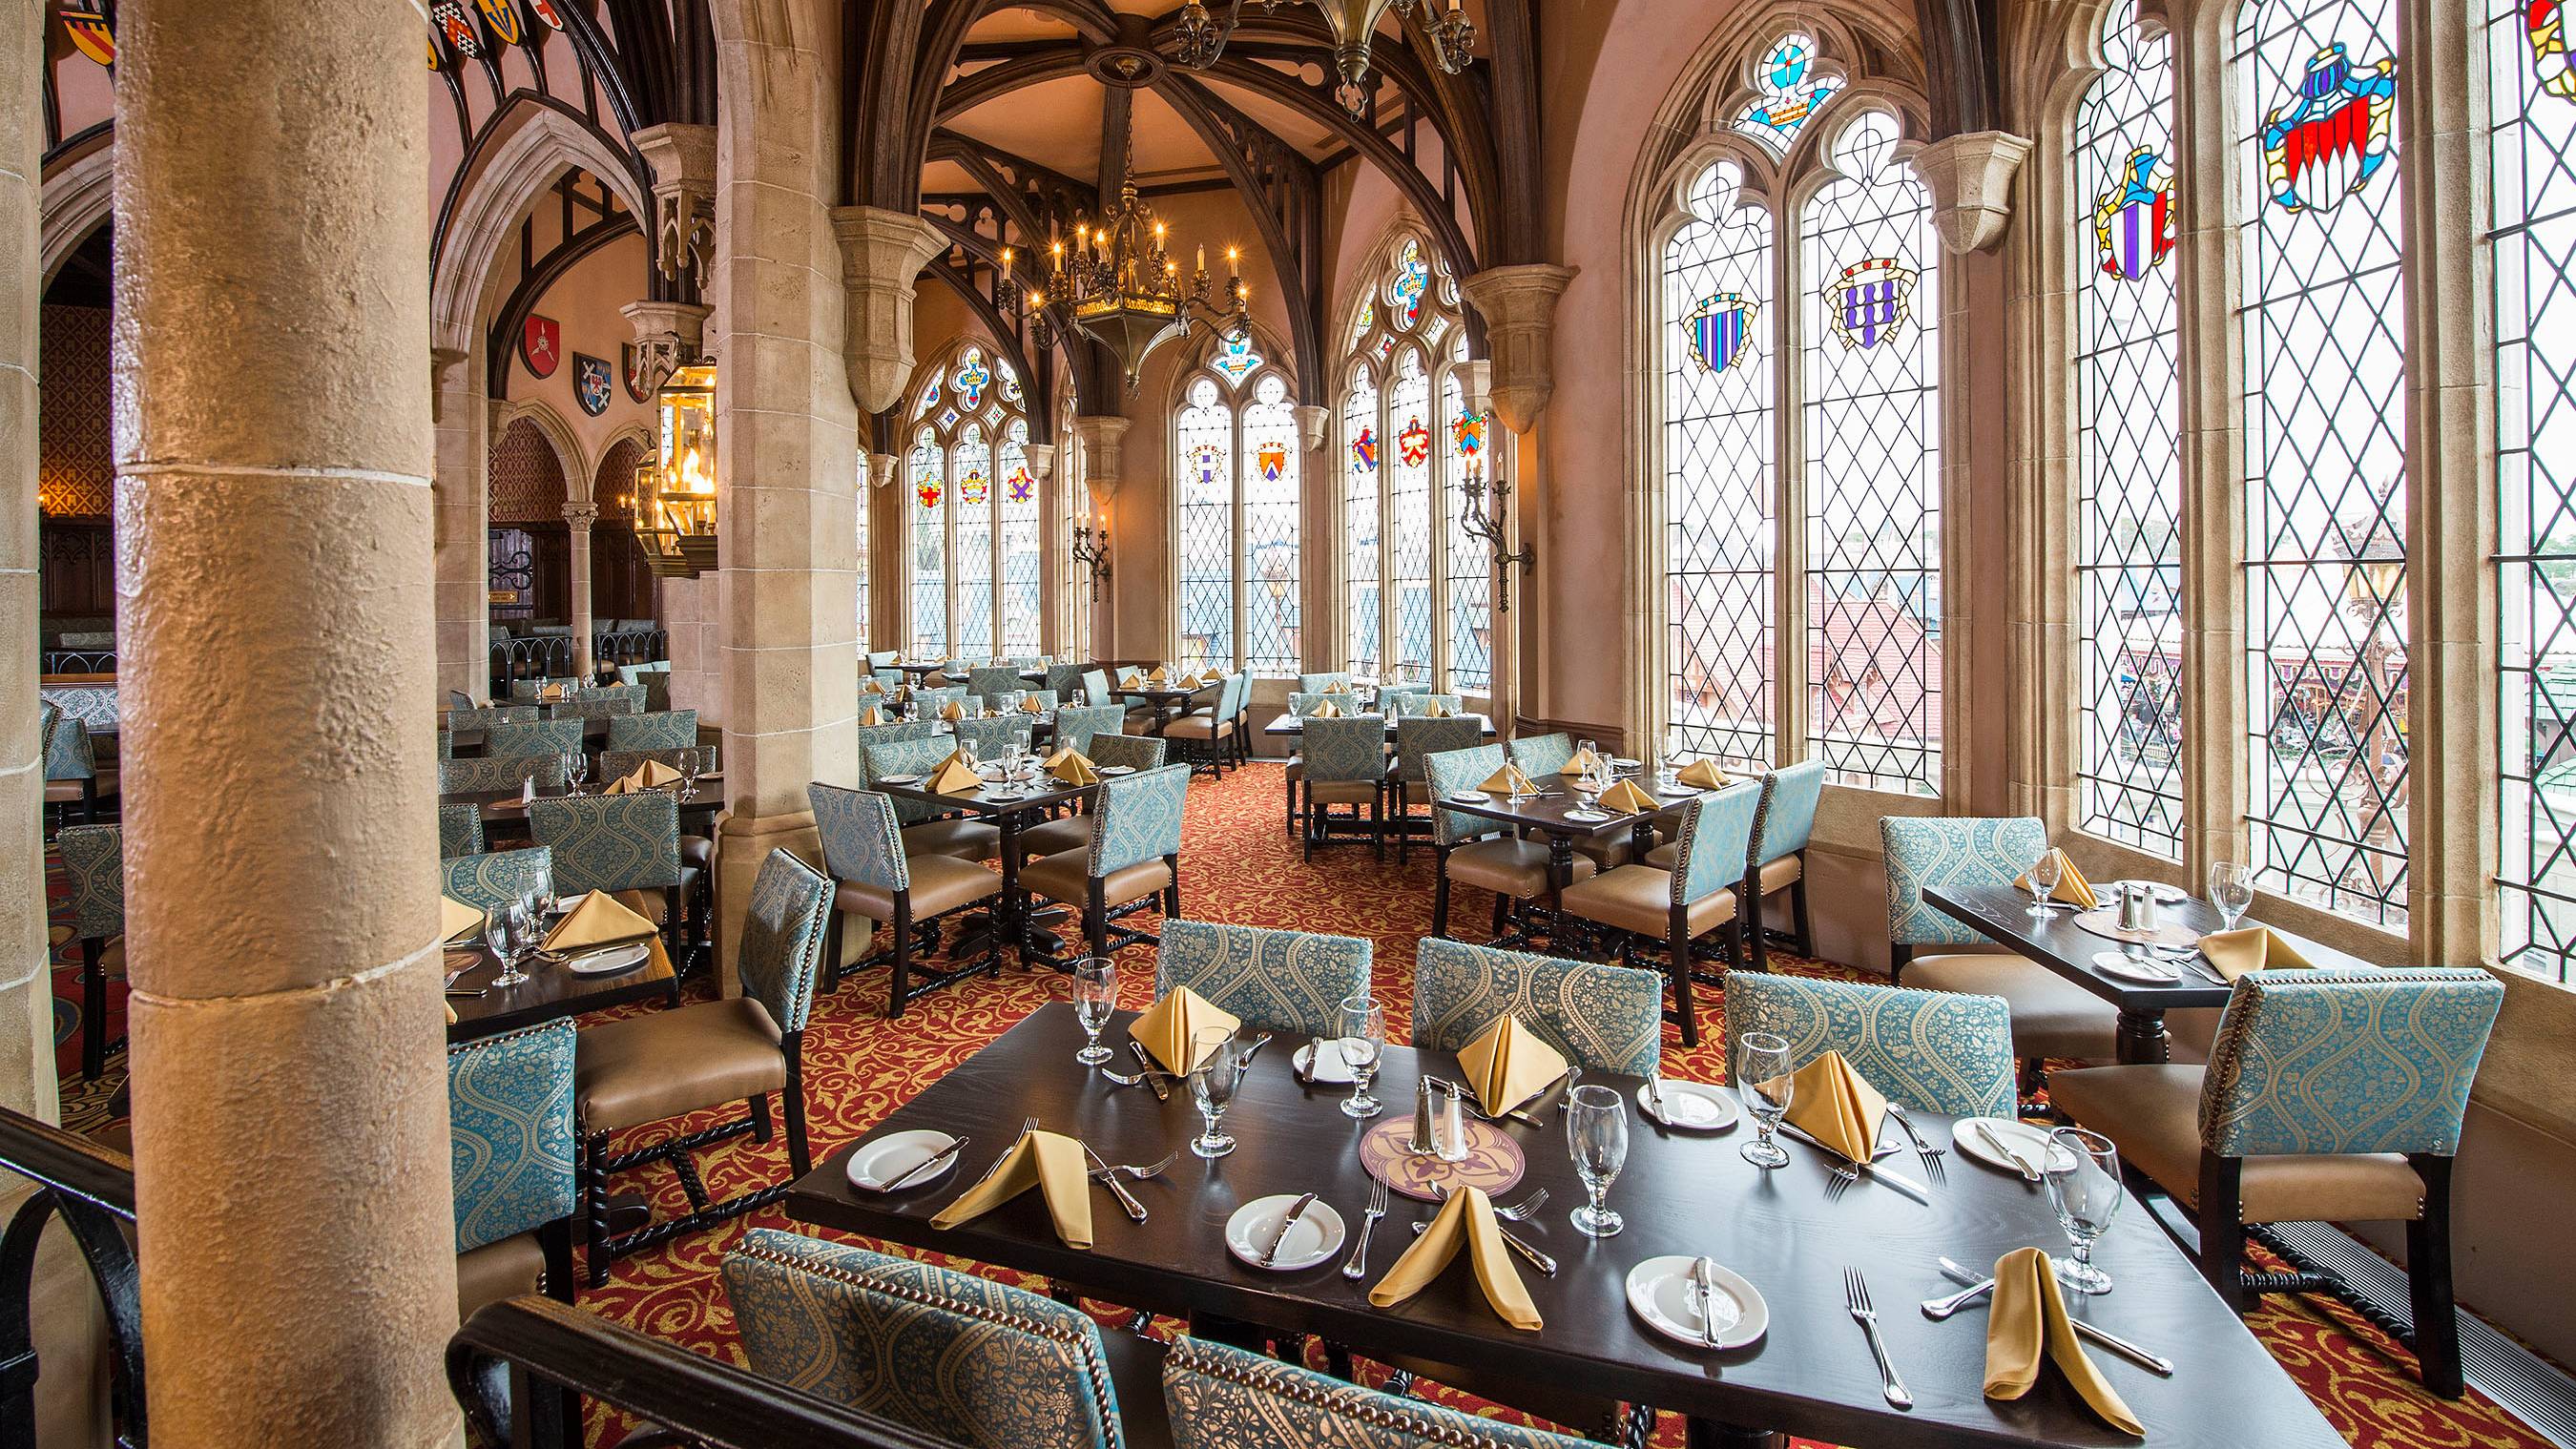 Character dining will return to Cinderella's Royal Table at Walt Disney World in early 2023